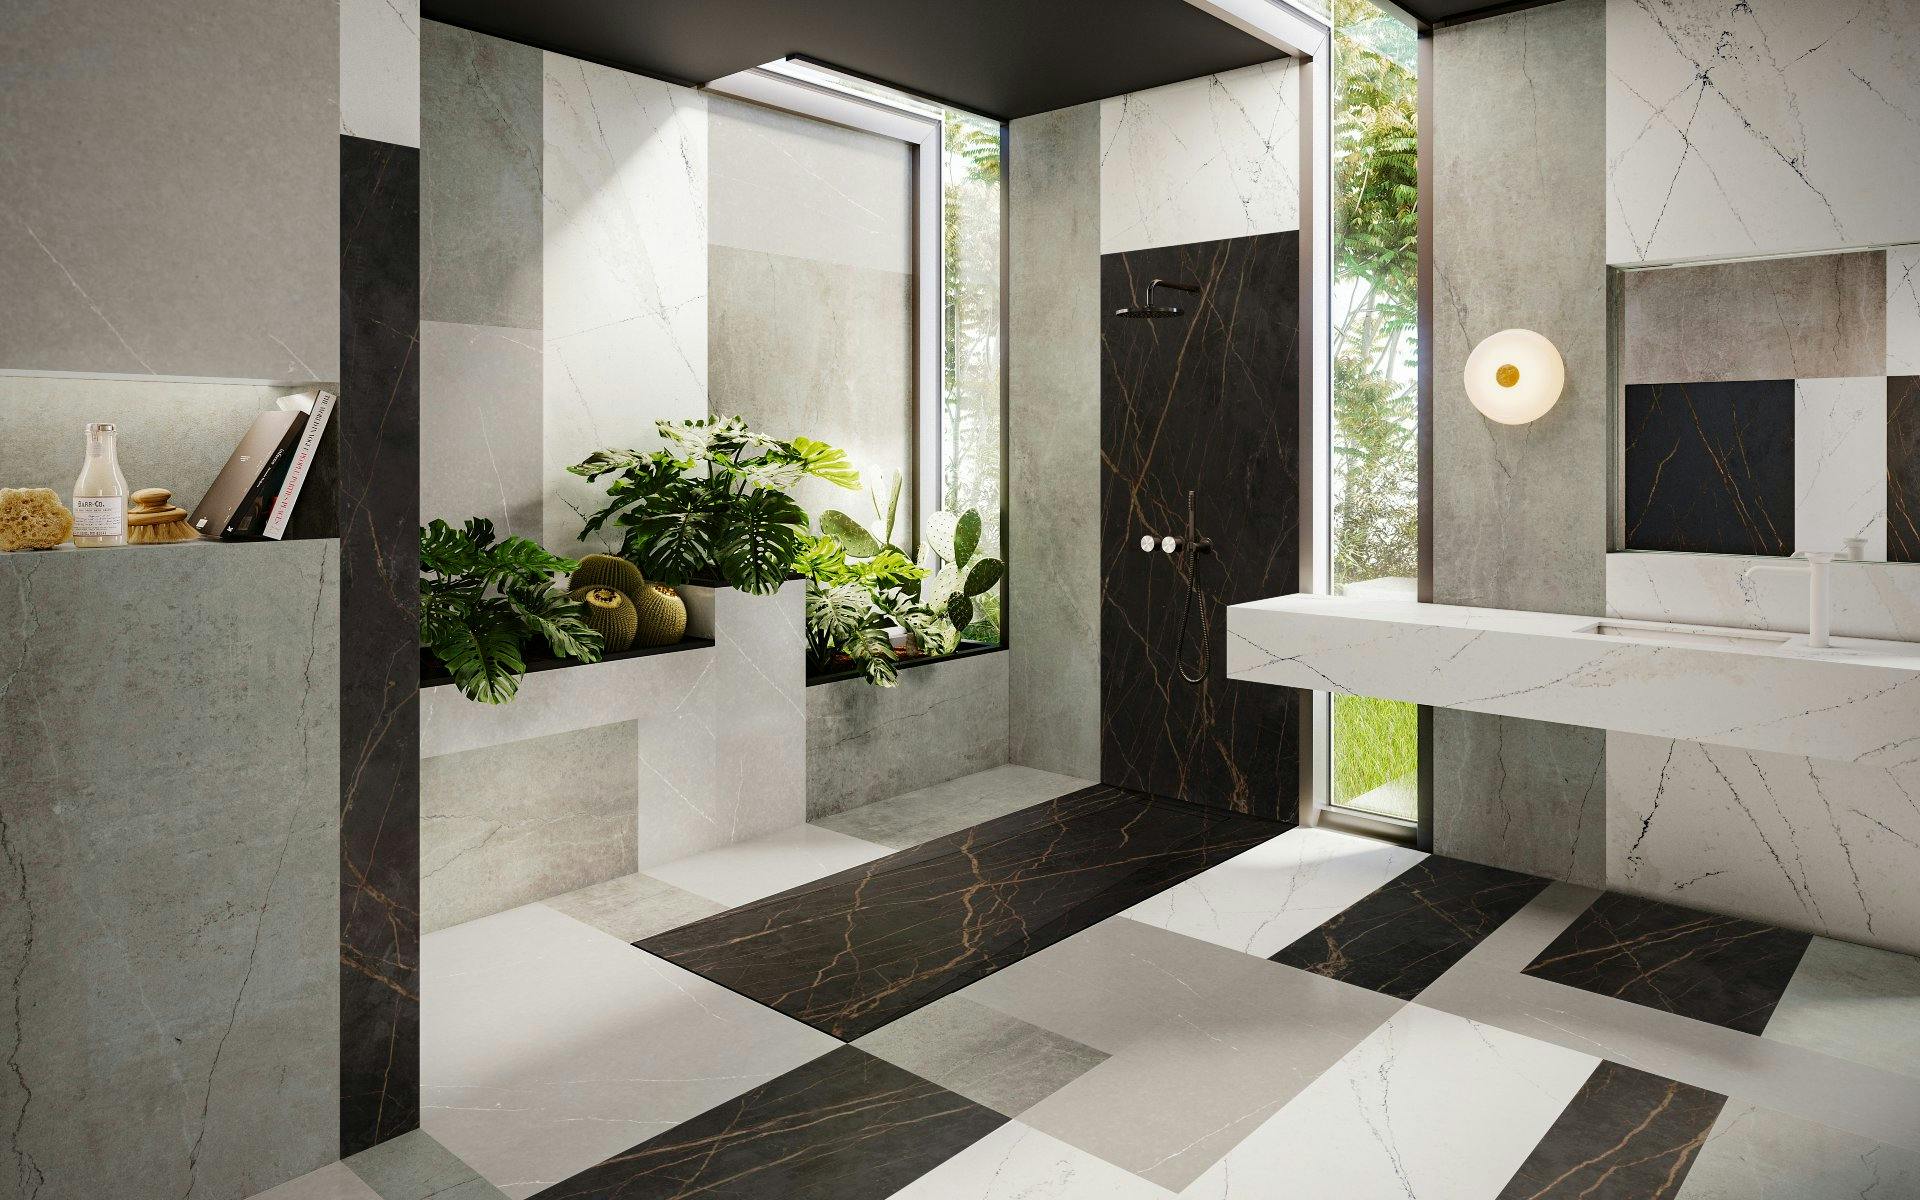 Numéro d'image 42 de la section actuelle de Cosentino partners with two designers in Malaysia to showcase the versatility of DKTN Pietra Kode and its use beyond the kitchen de Cosentino France